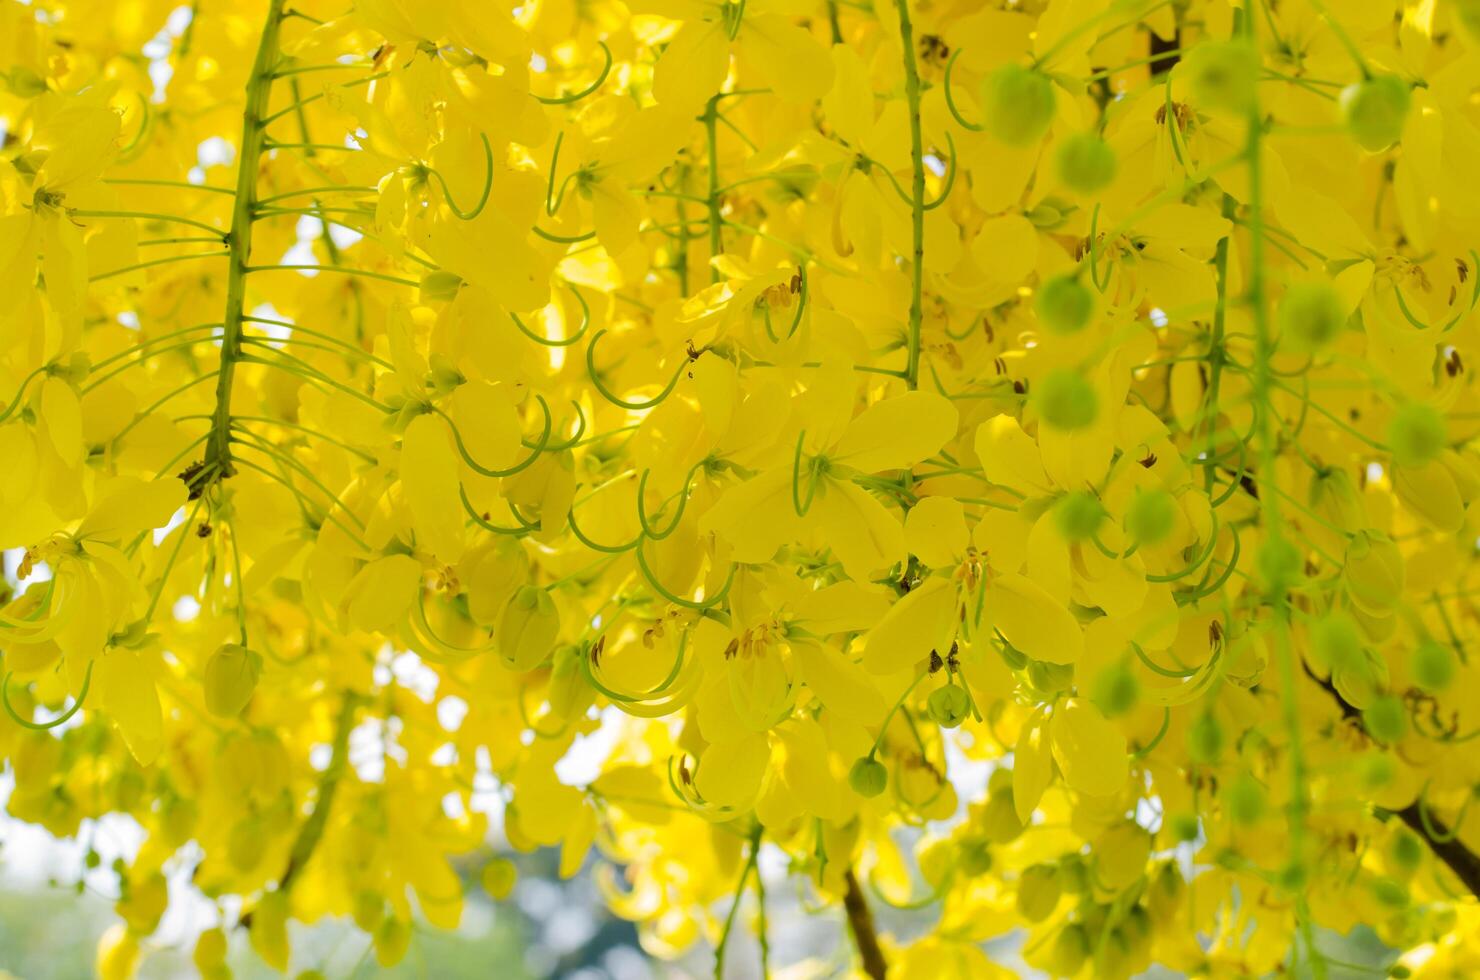 Yellow Blossom of Cassia Fistula or Golden Shower Tree Blooming in Summer photo